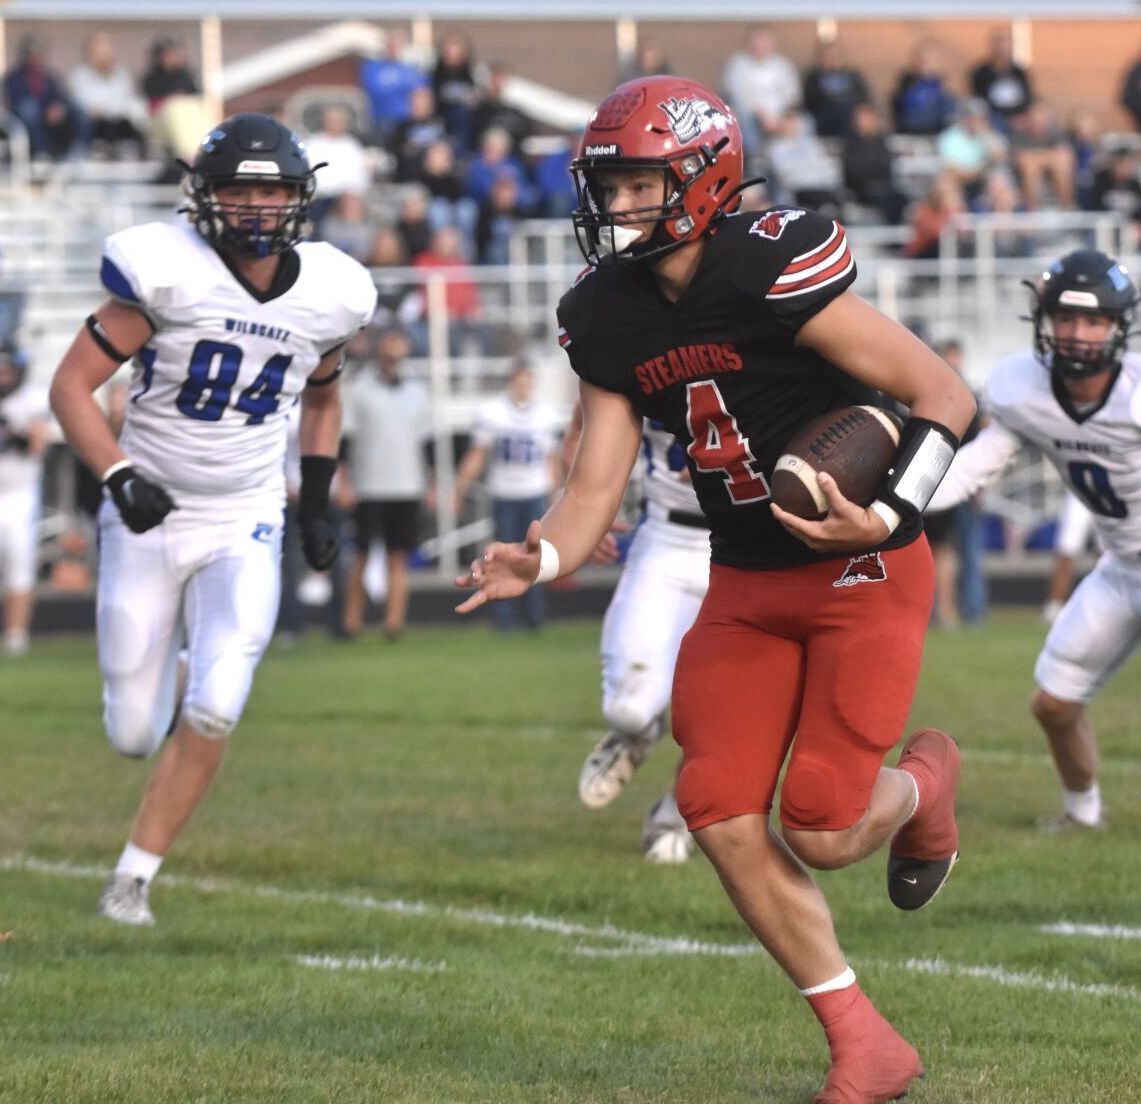 Fulton Steamers Aim for Fourth Straight Win Against Galena Pirates